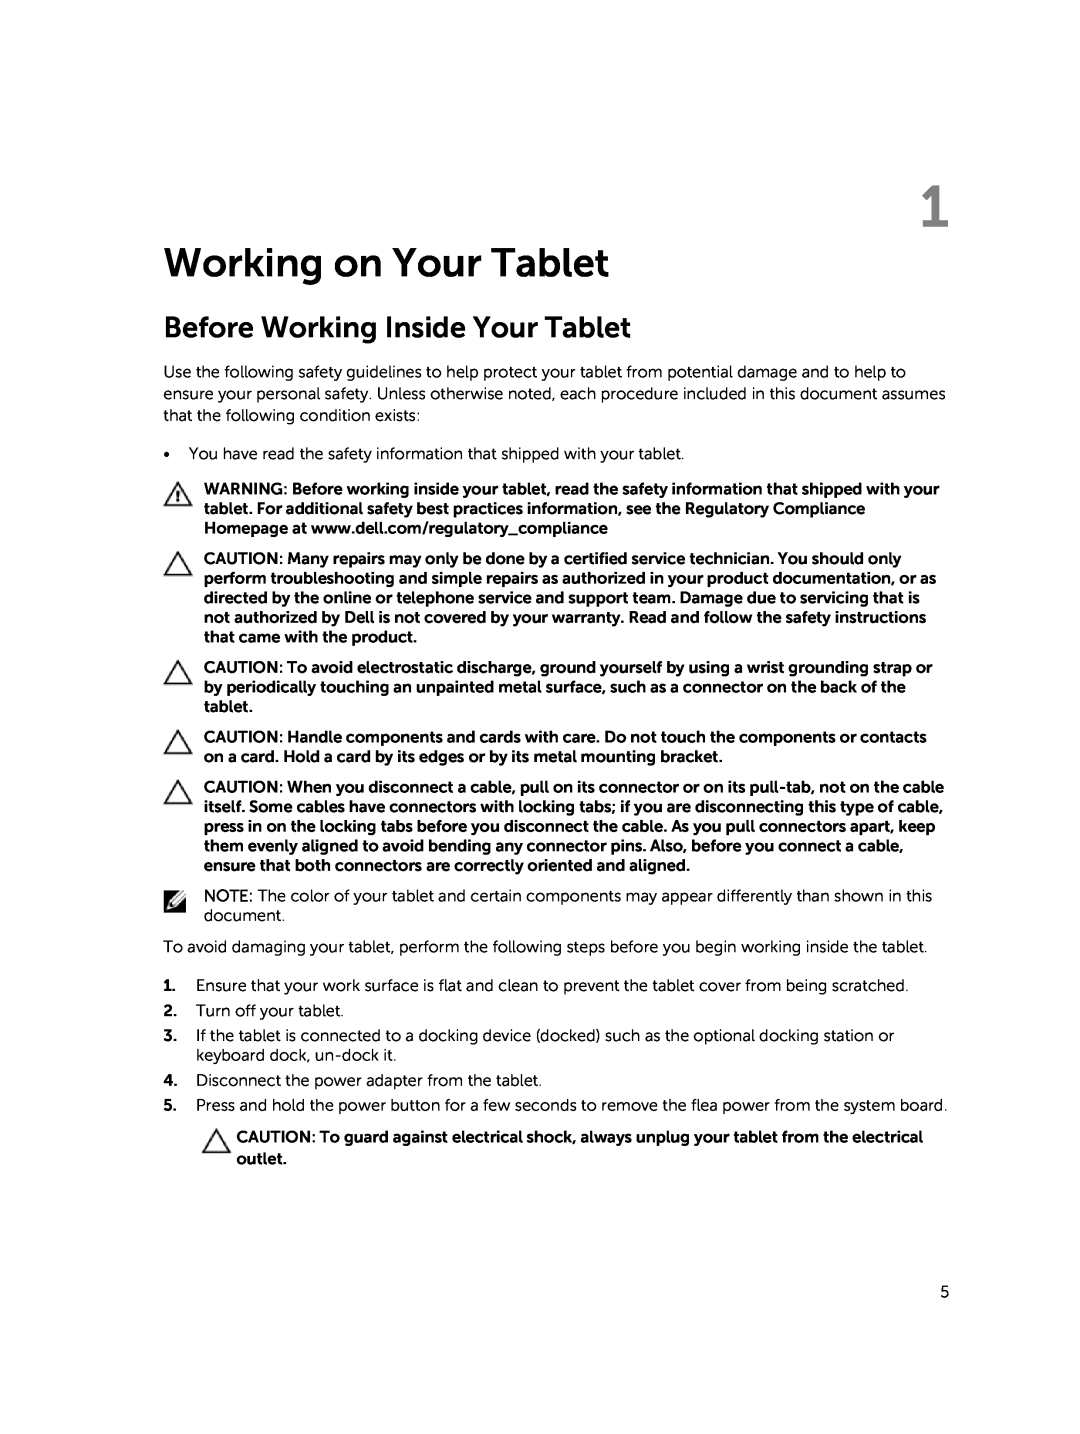 Dell T07G manual Working on Your Tablet, Before Working Inside Your Tablet 